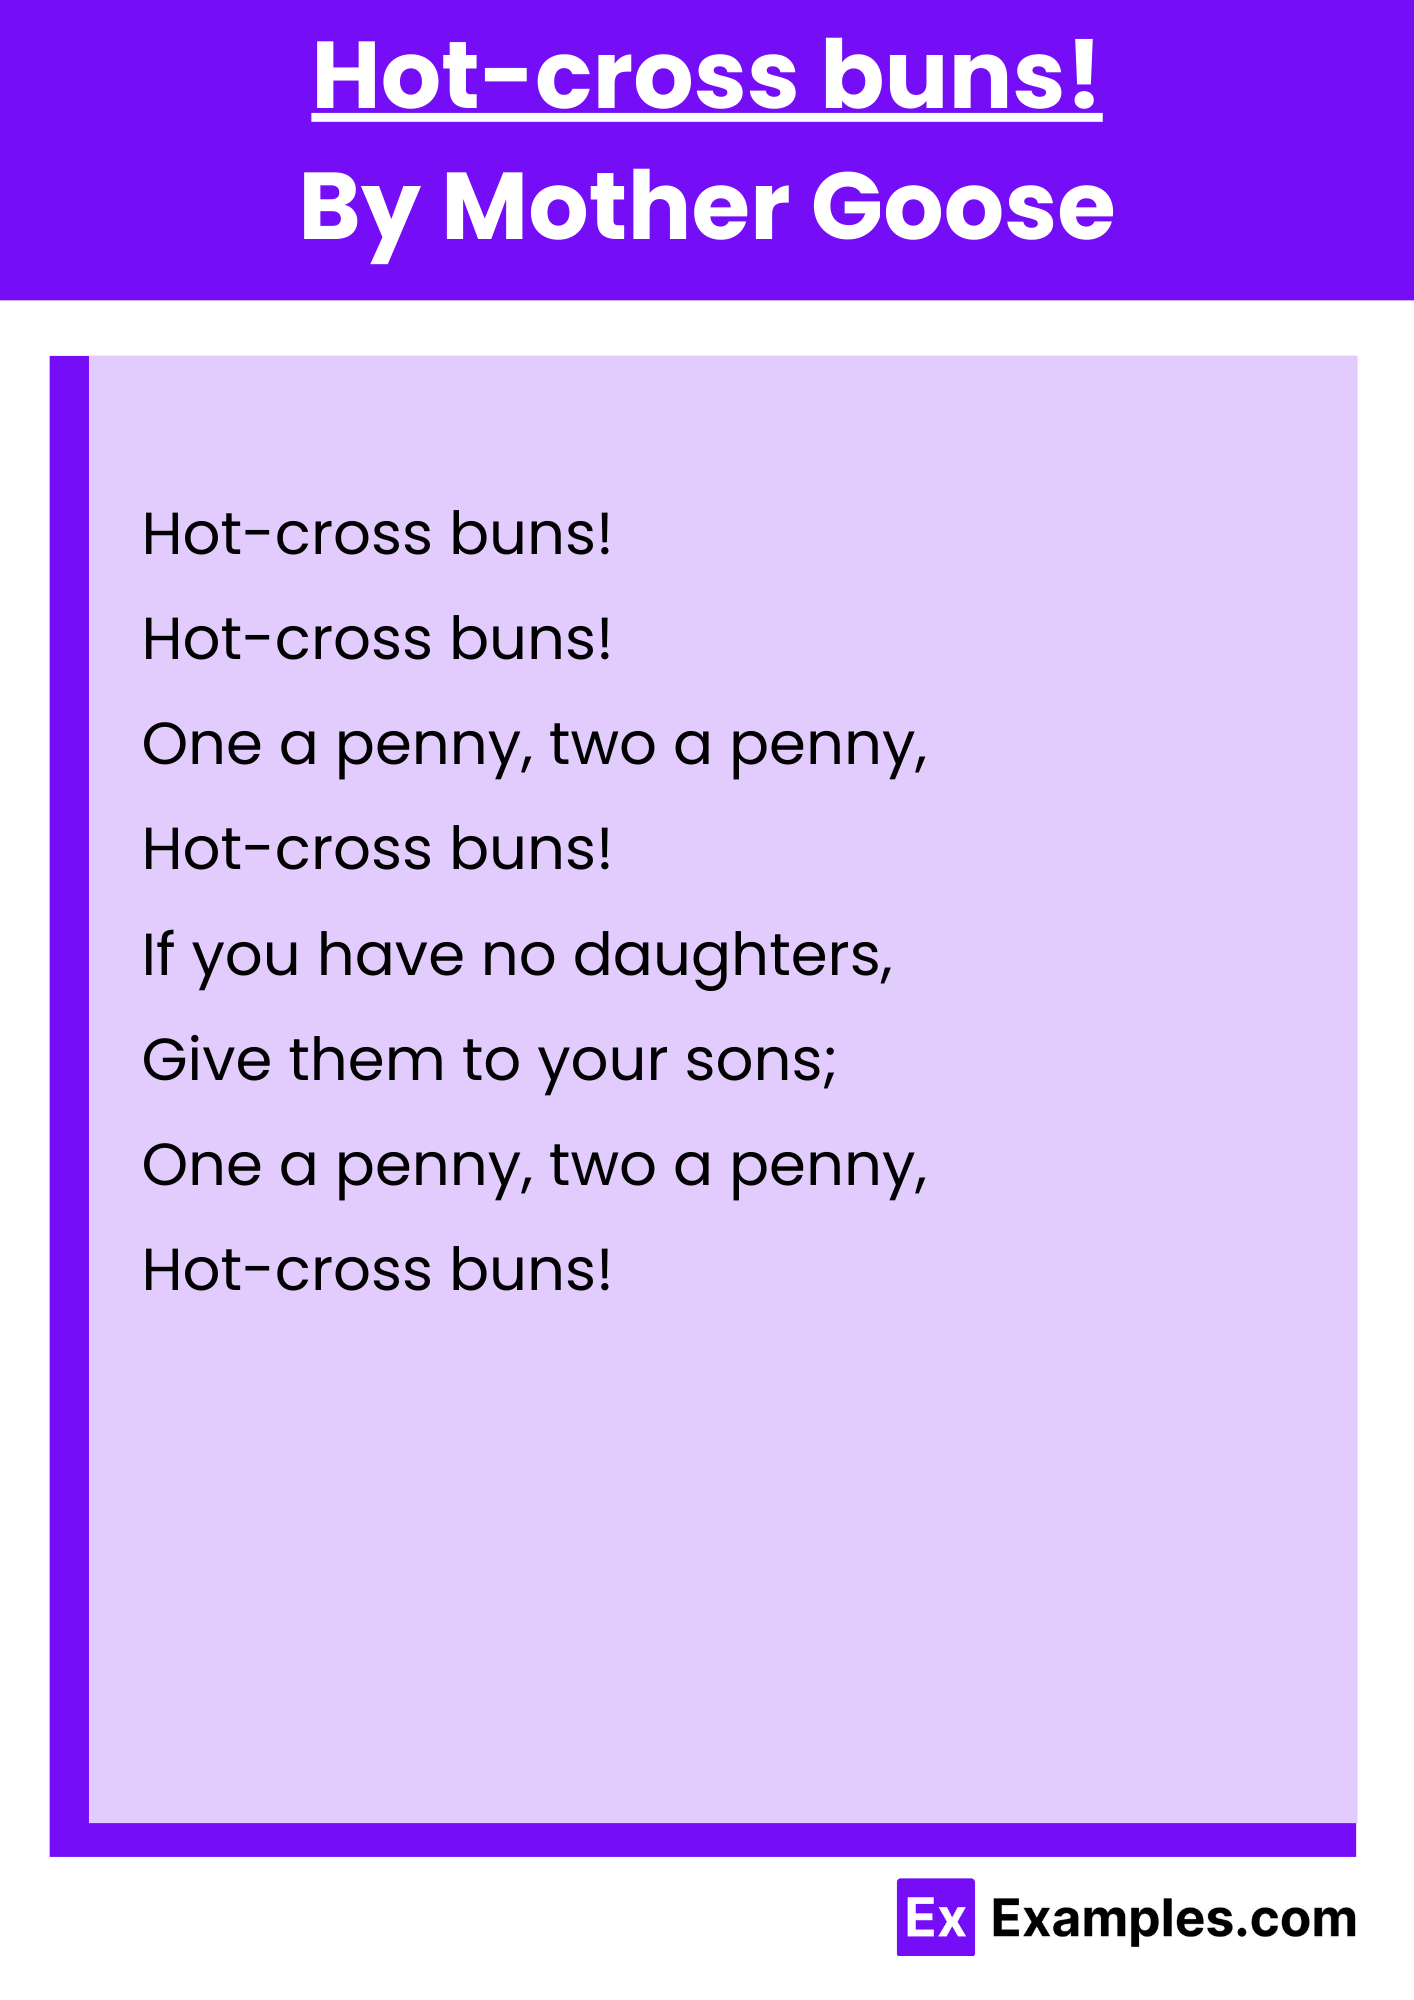 Hot-cross buns! By Mother Goose